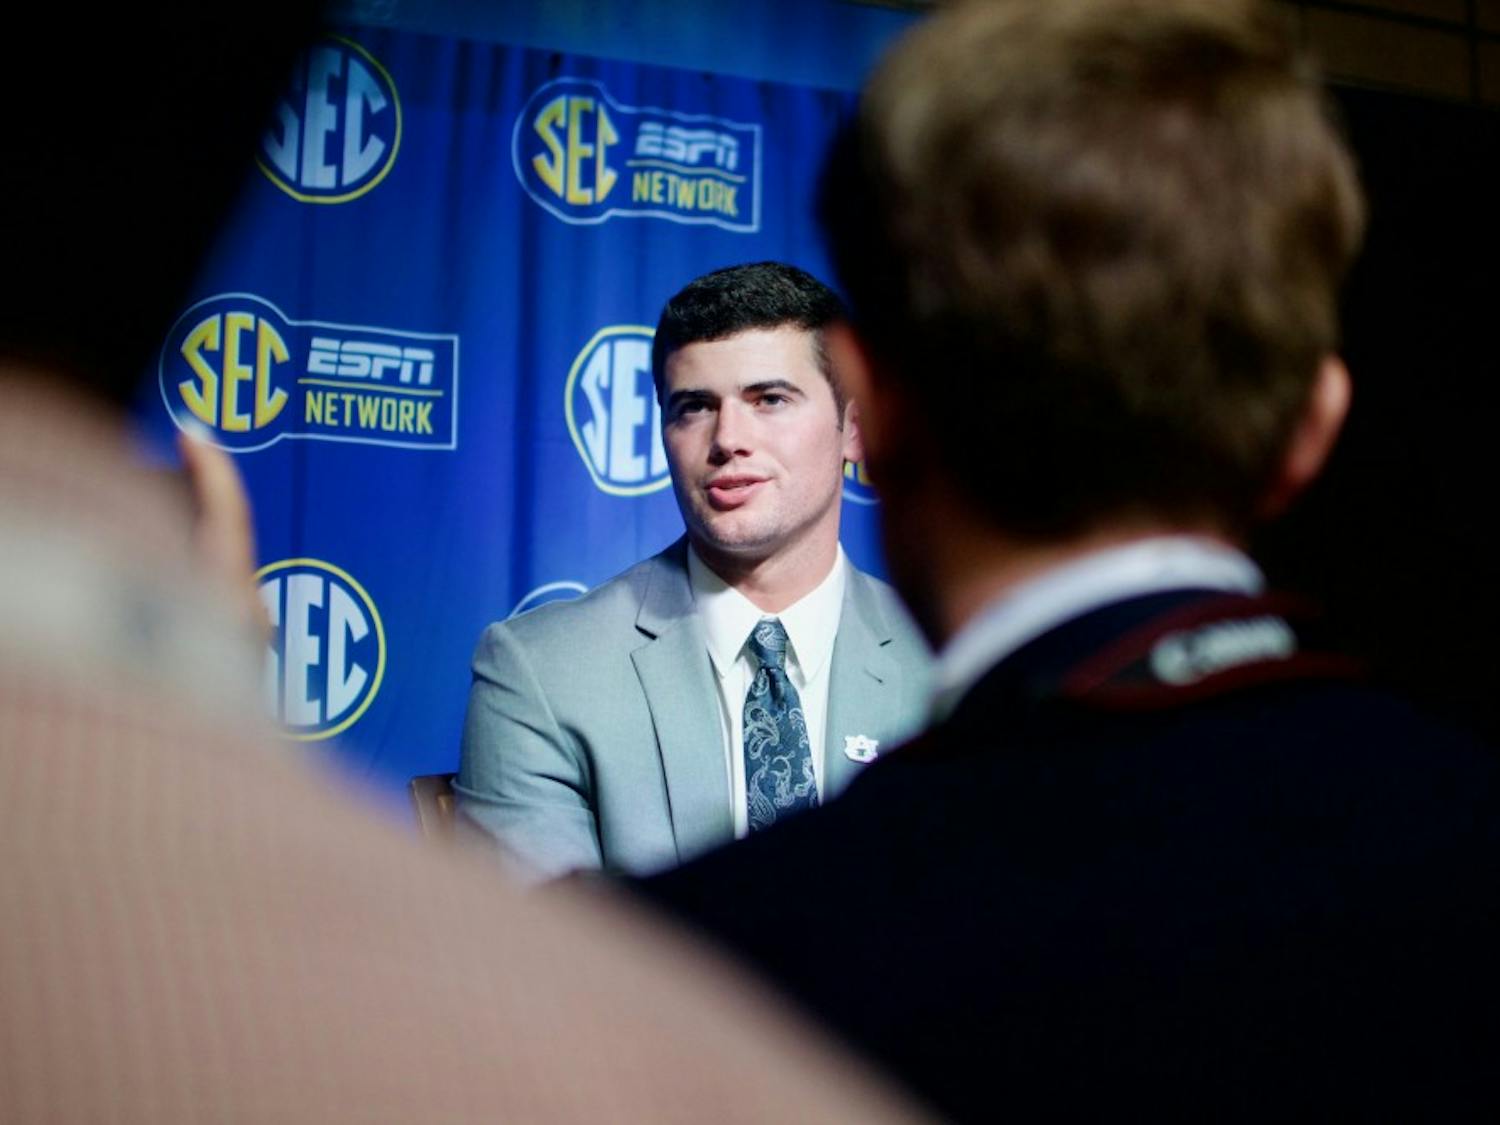 Jarrett Stidham&nbsp;answers a question during an interview at SEC Media Days in the College Football Hall of Fame on Thursday, July 19, 2018 in Atlanta, Ga.